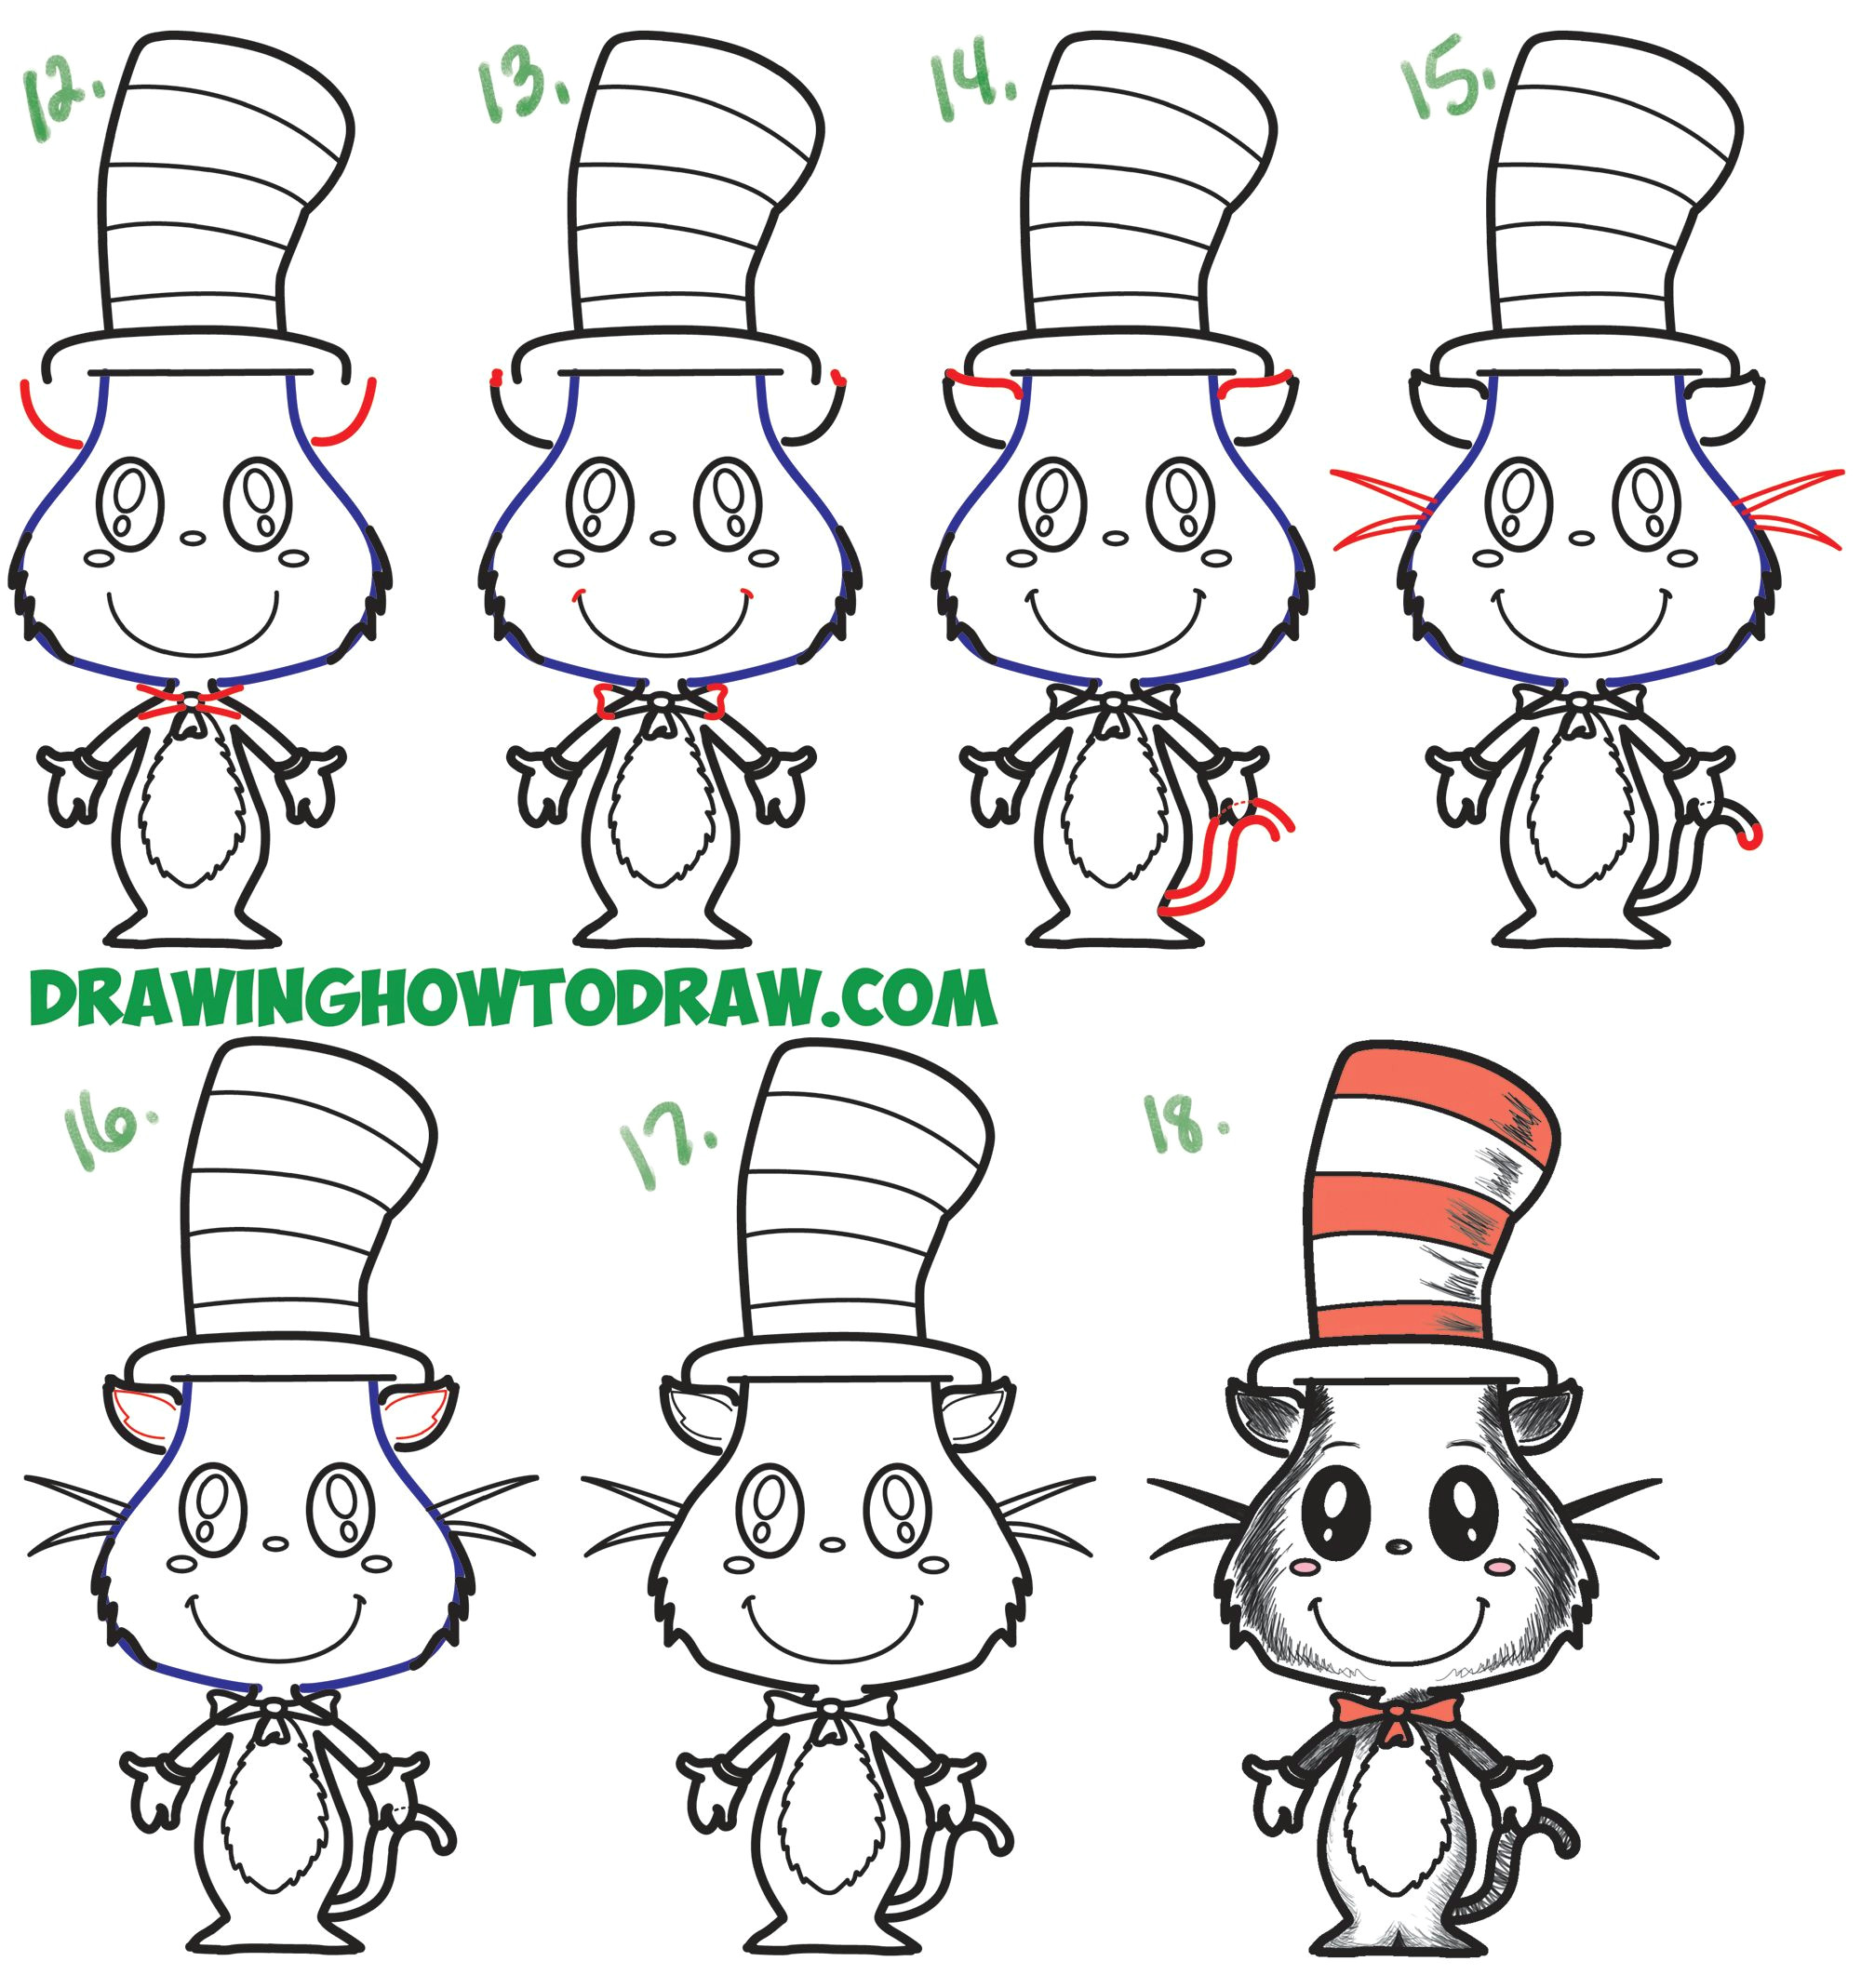 Easy Drawing Kitty How to Draw the Cat In the Hat Cute Kawaii Chibi Version Easy